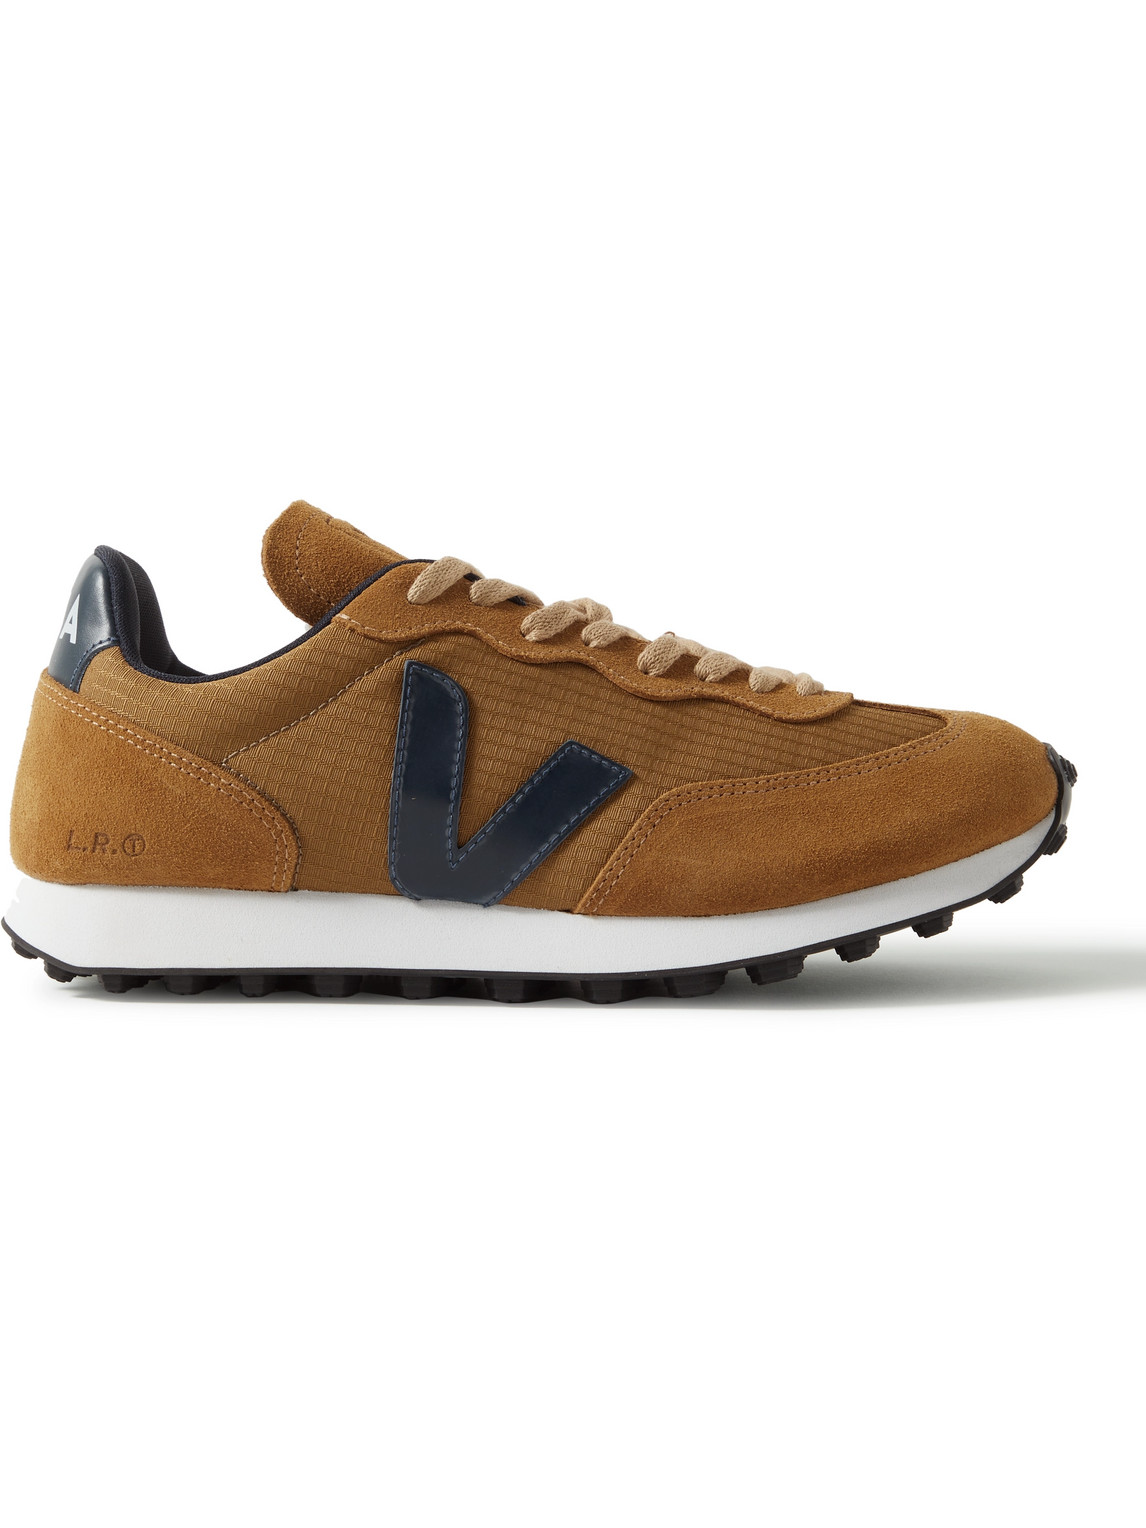 Rio Branco Leather and Rubber-Trimmed Ripstop and Suede Sneakers